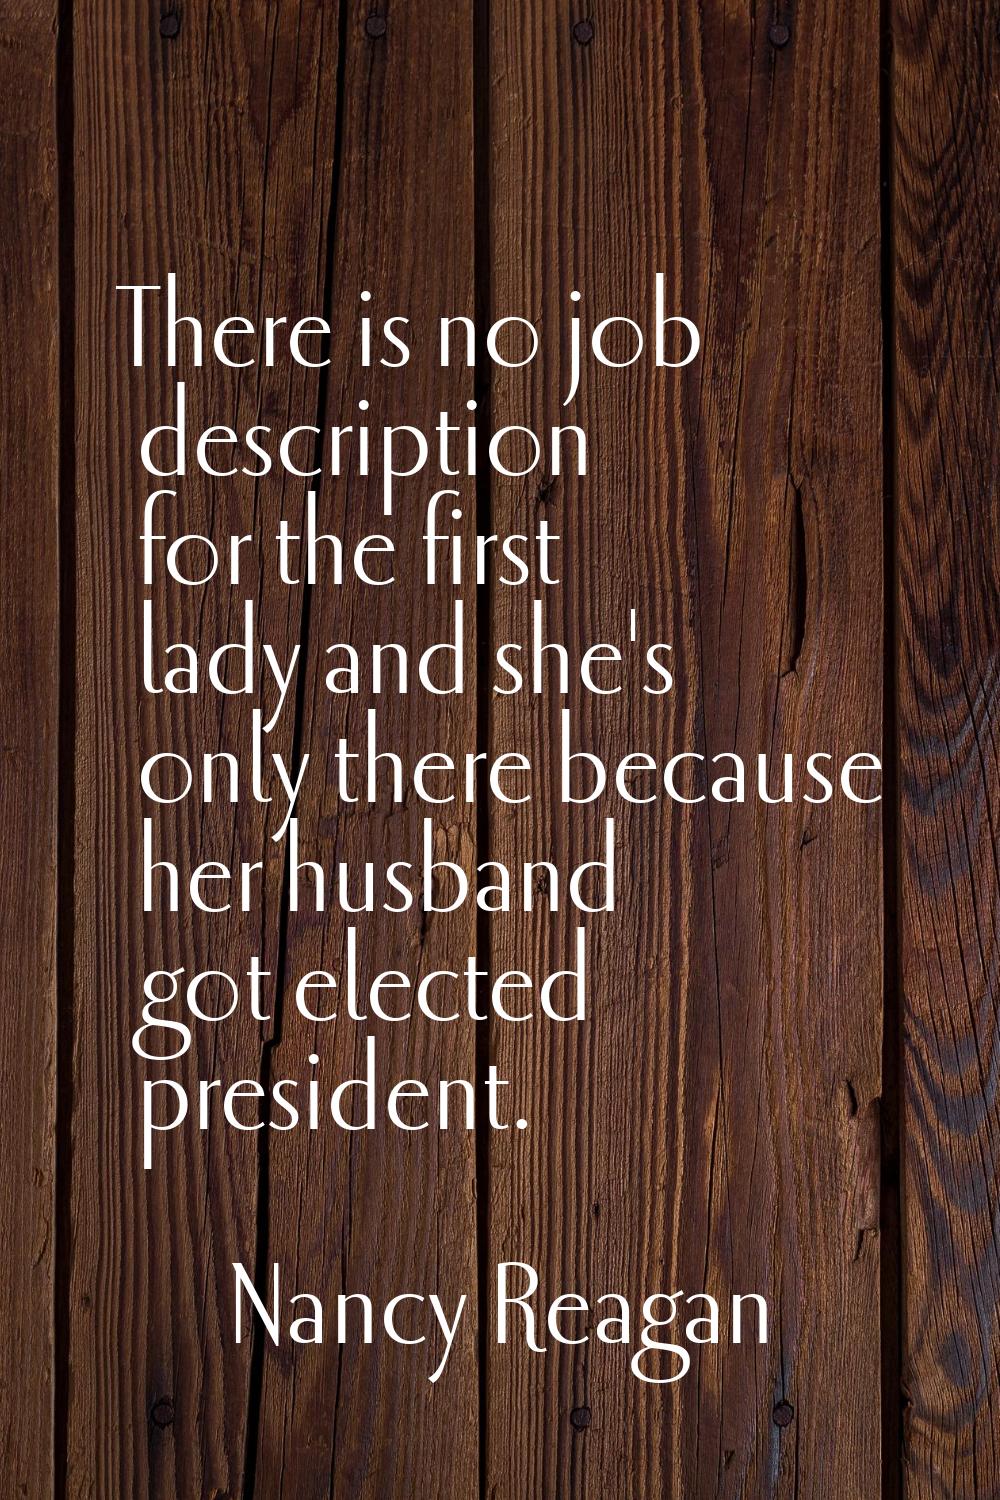 There is no job description for the first lady and she's only there because her husband got elected